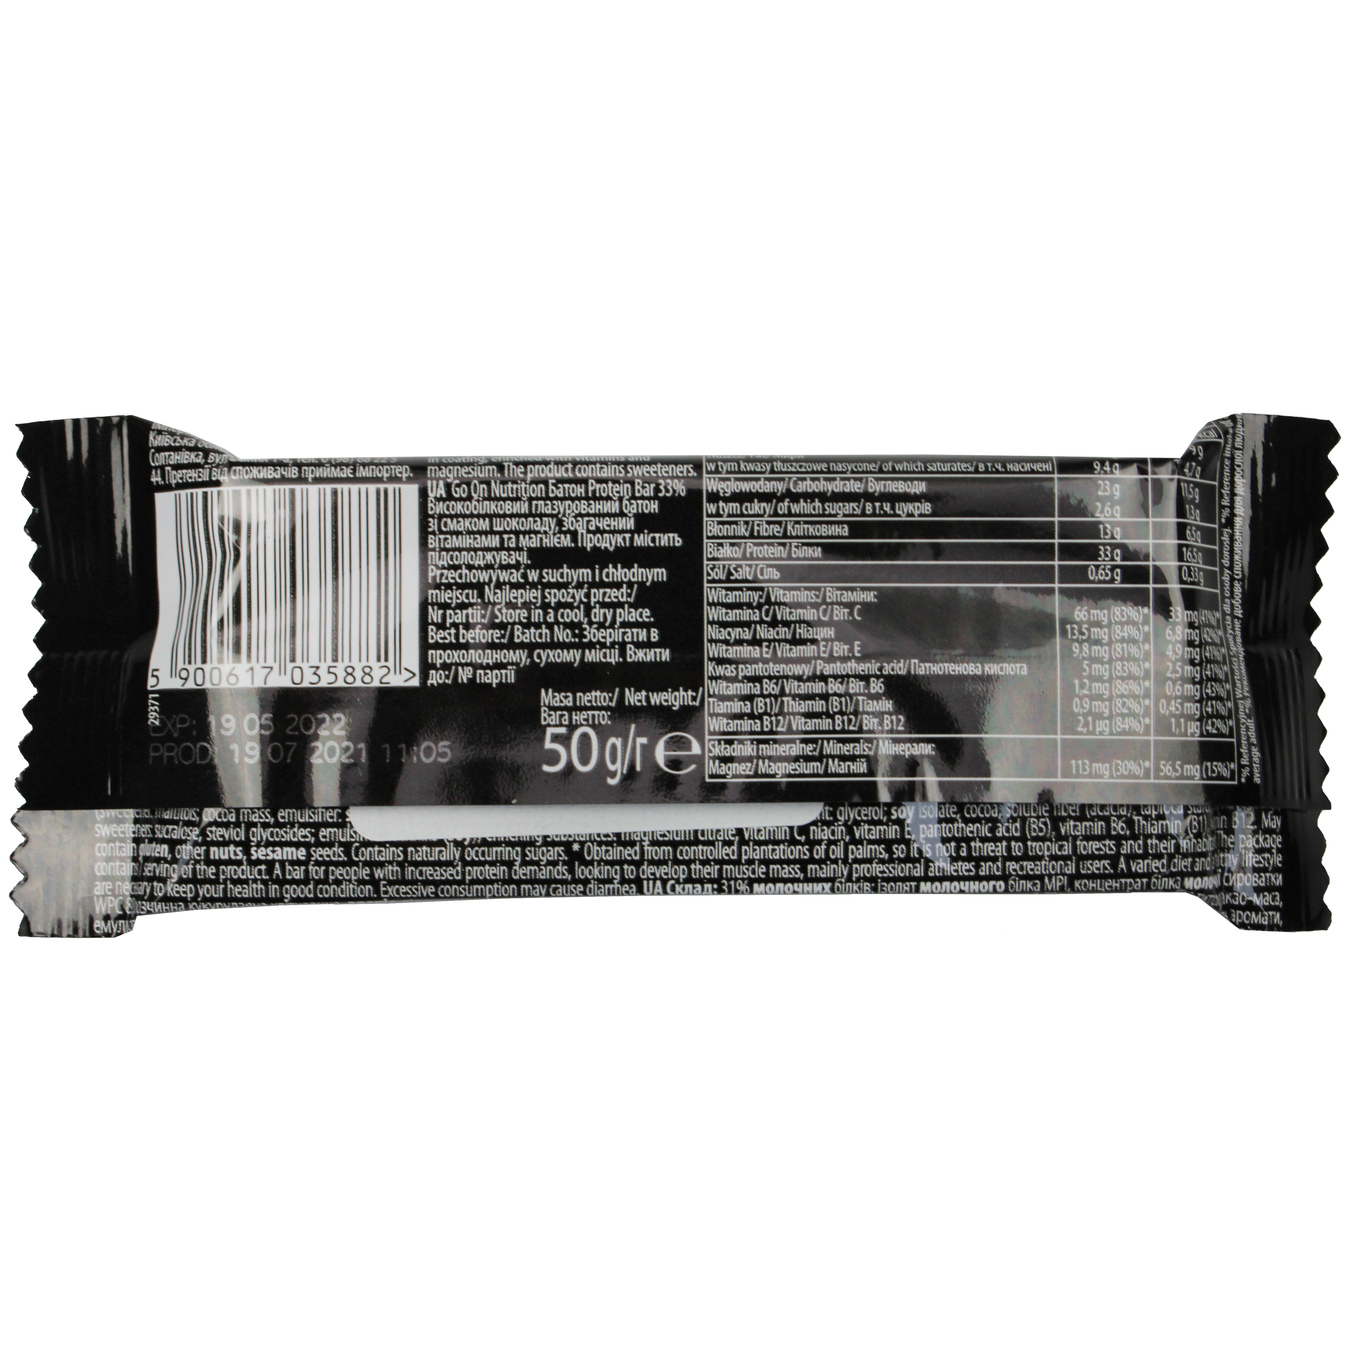 Go On With Chocolate Protein Bar 33% 50g 2